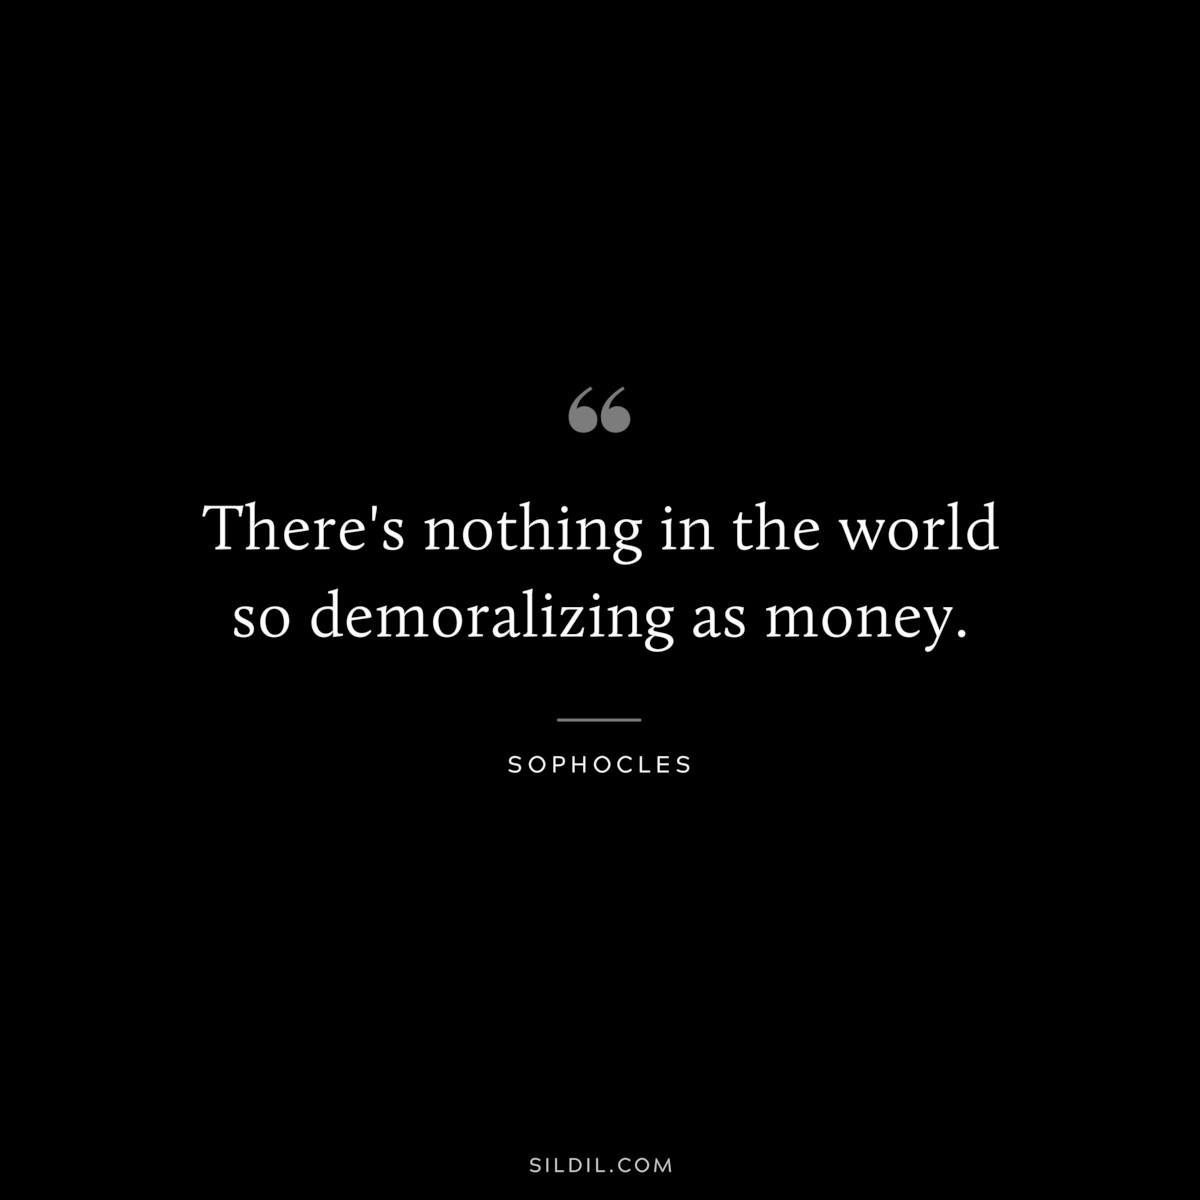 There's nothing in the world so demoralizing as money. ― Sophocles